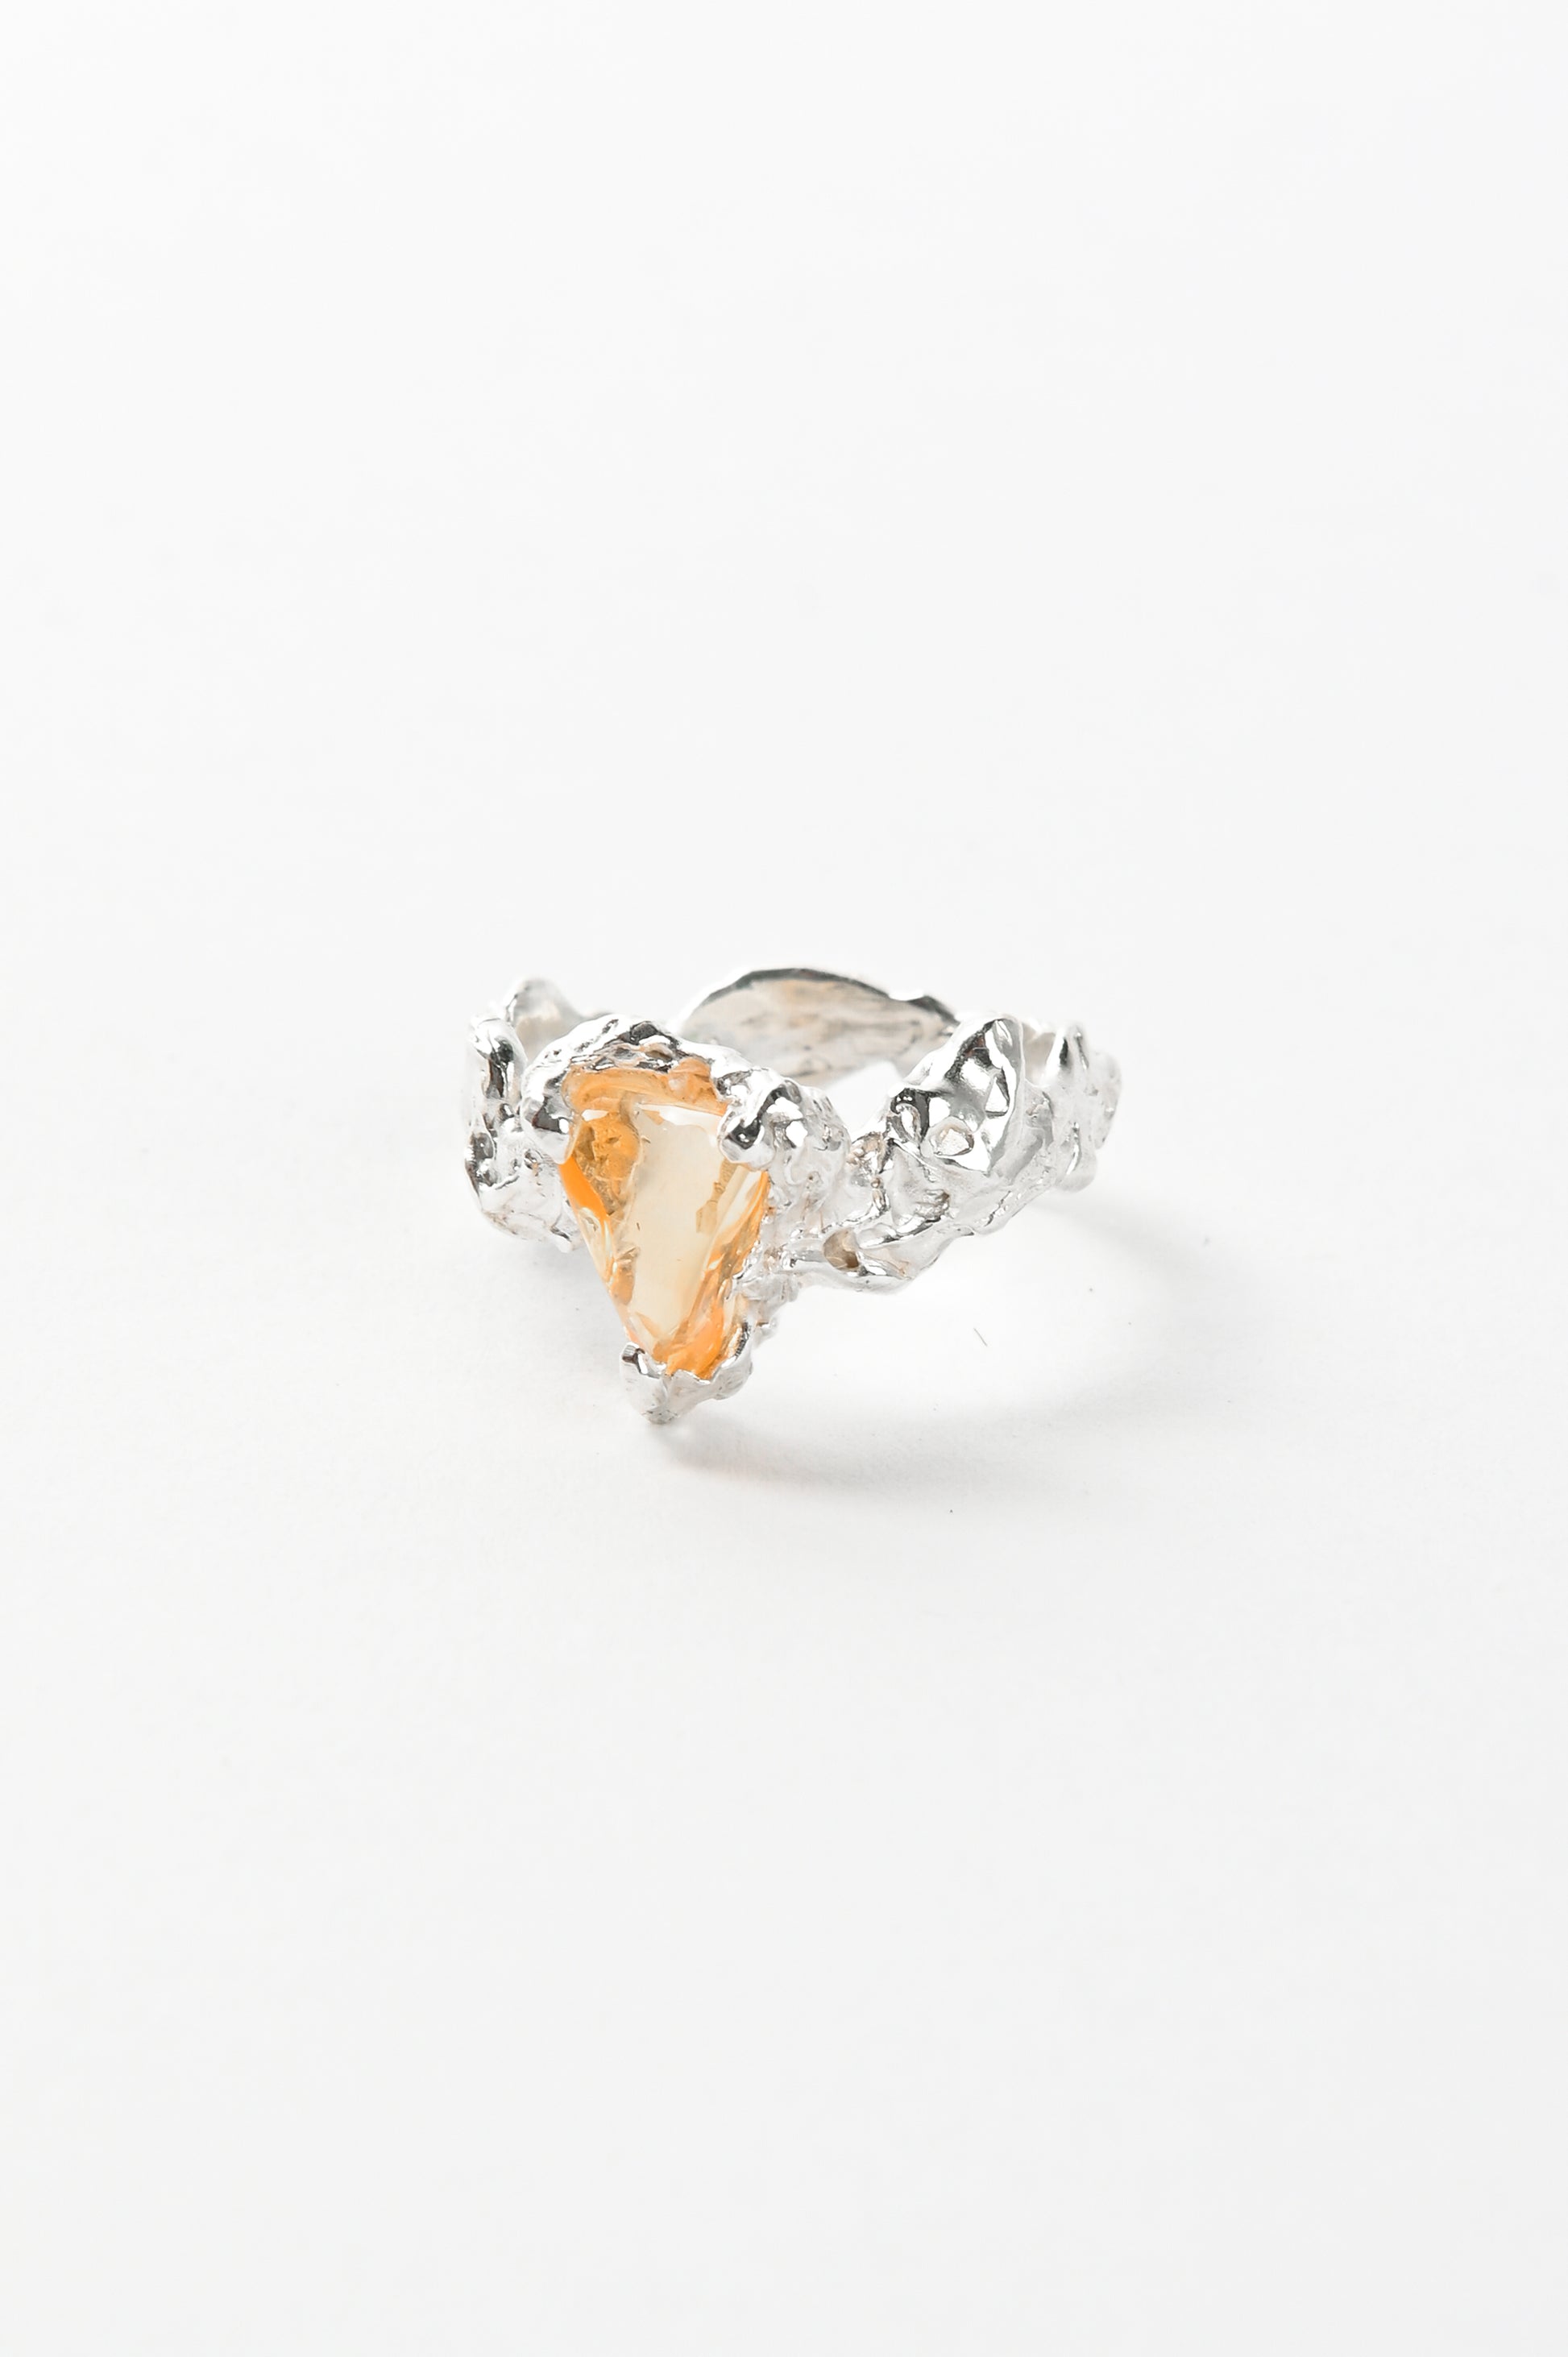 Nadia Ridiandries 'Ignite' Ring With Yellow Opal